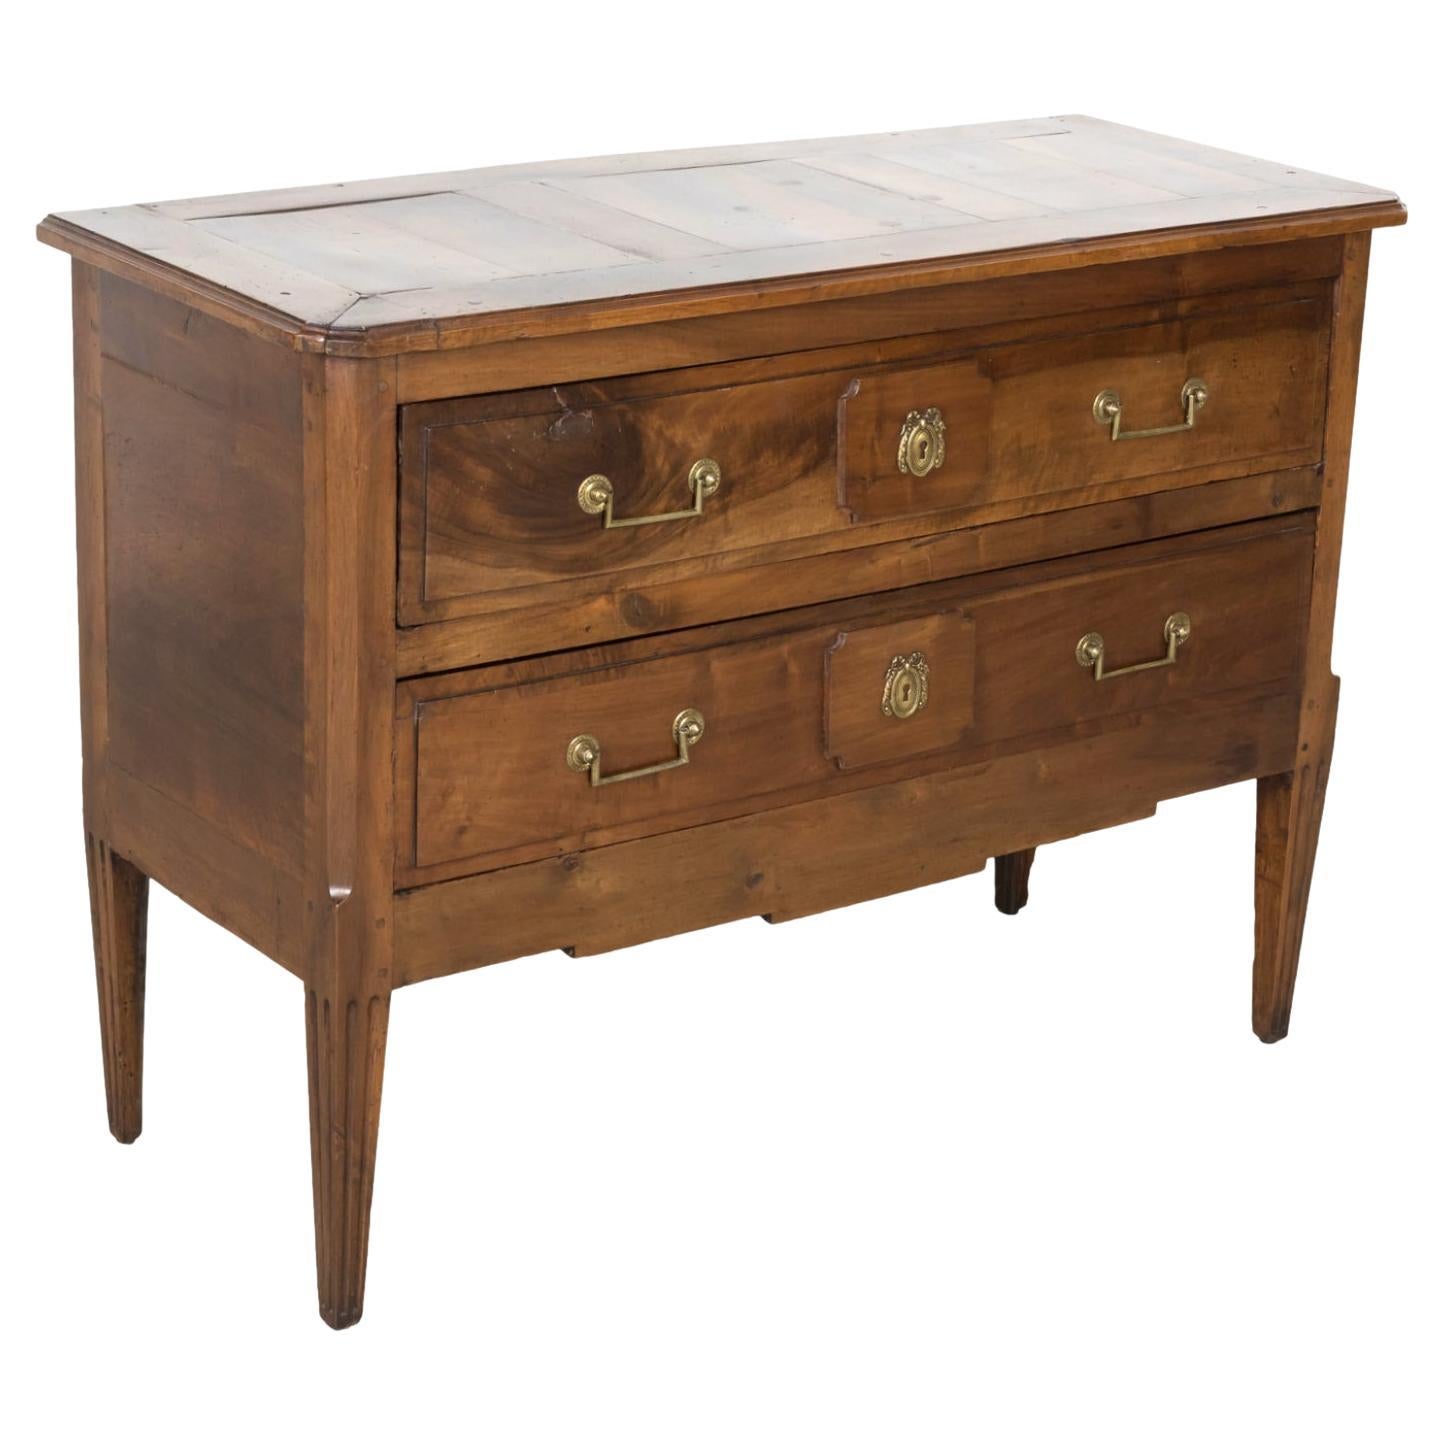 Early 19th Century French Louis XVI Style Two Drawer Walnut Commode Sauteuse